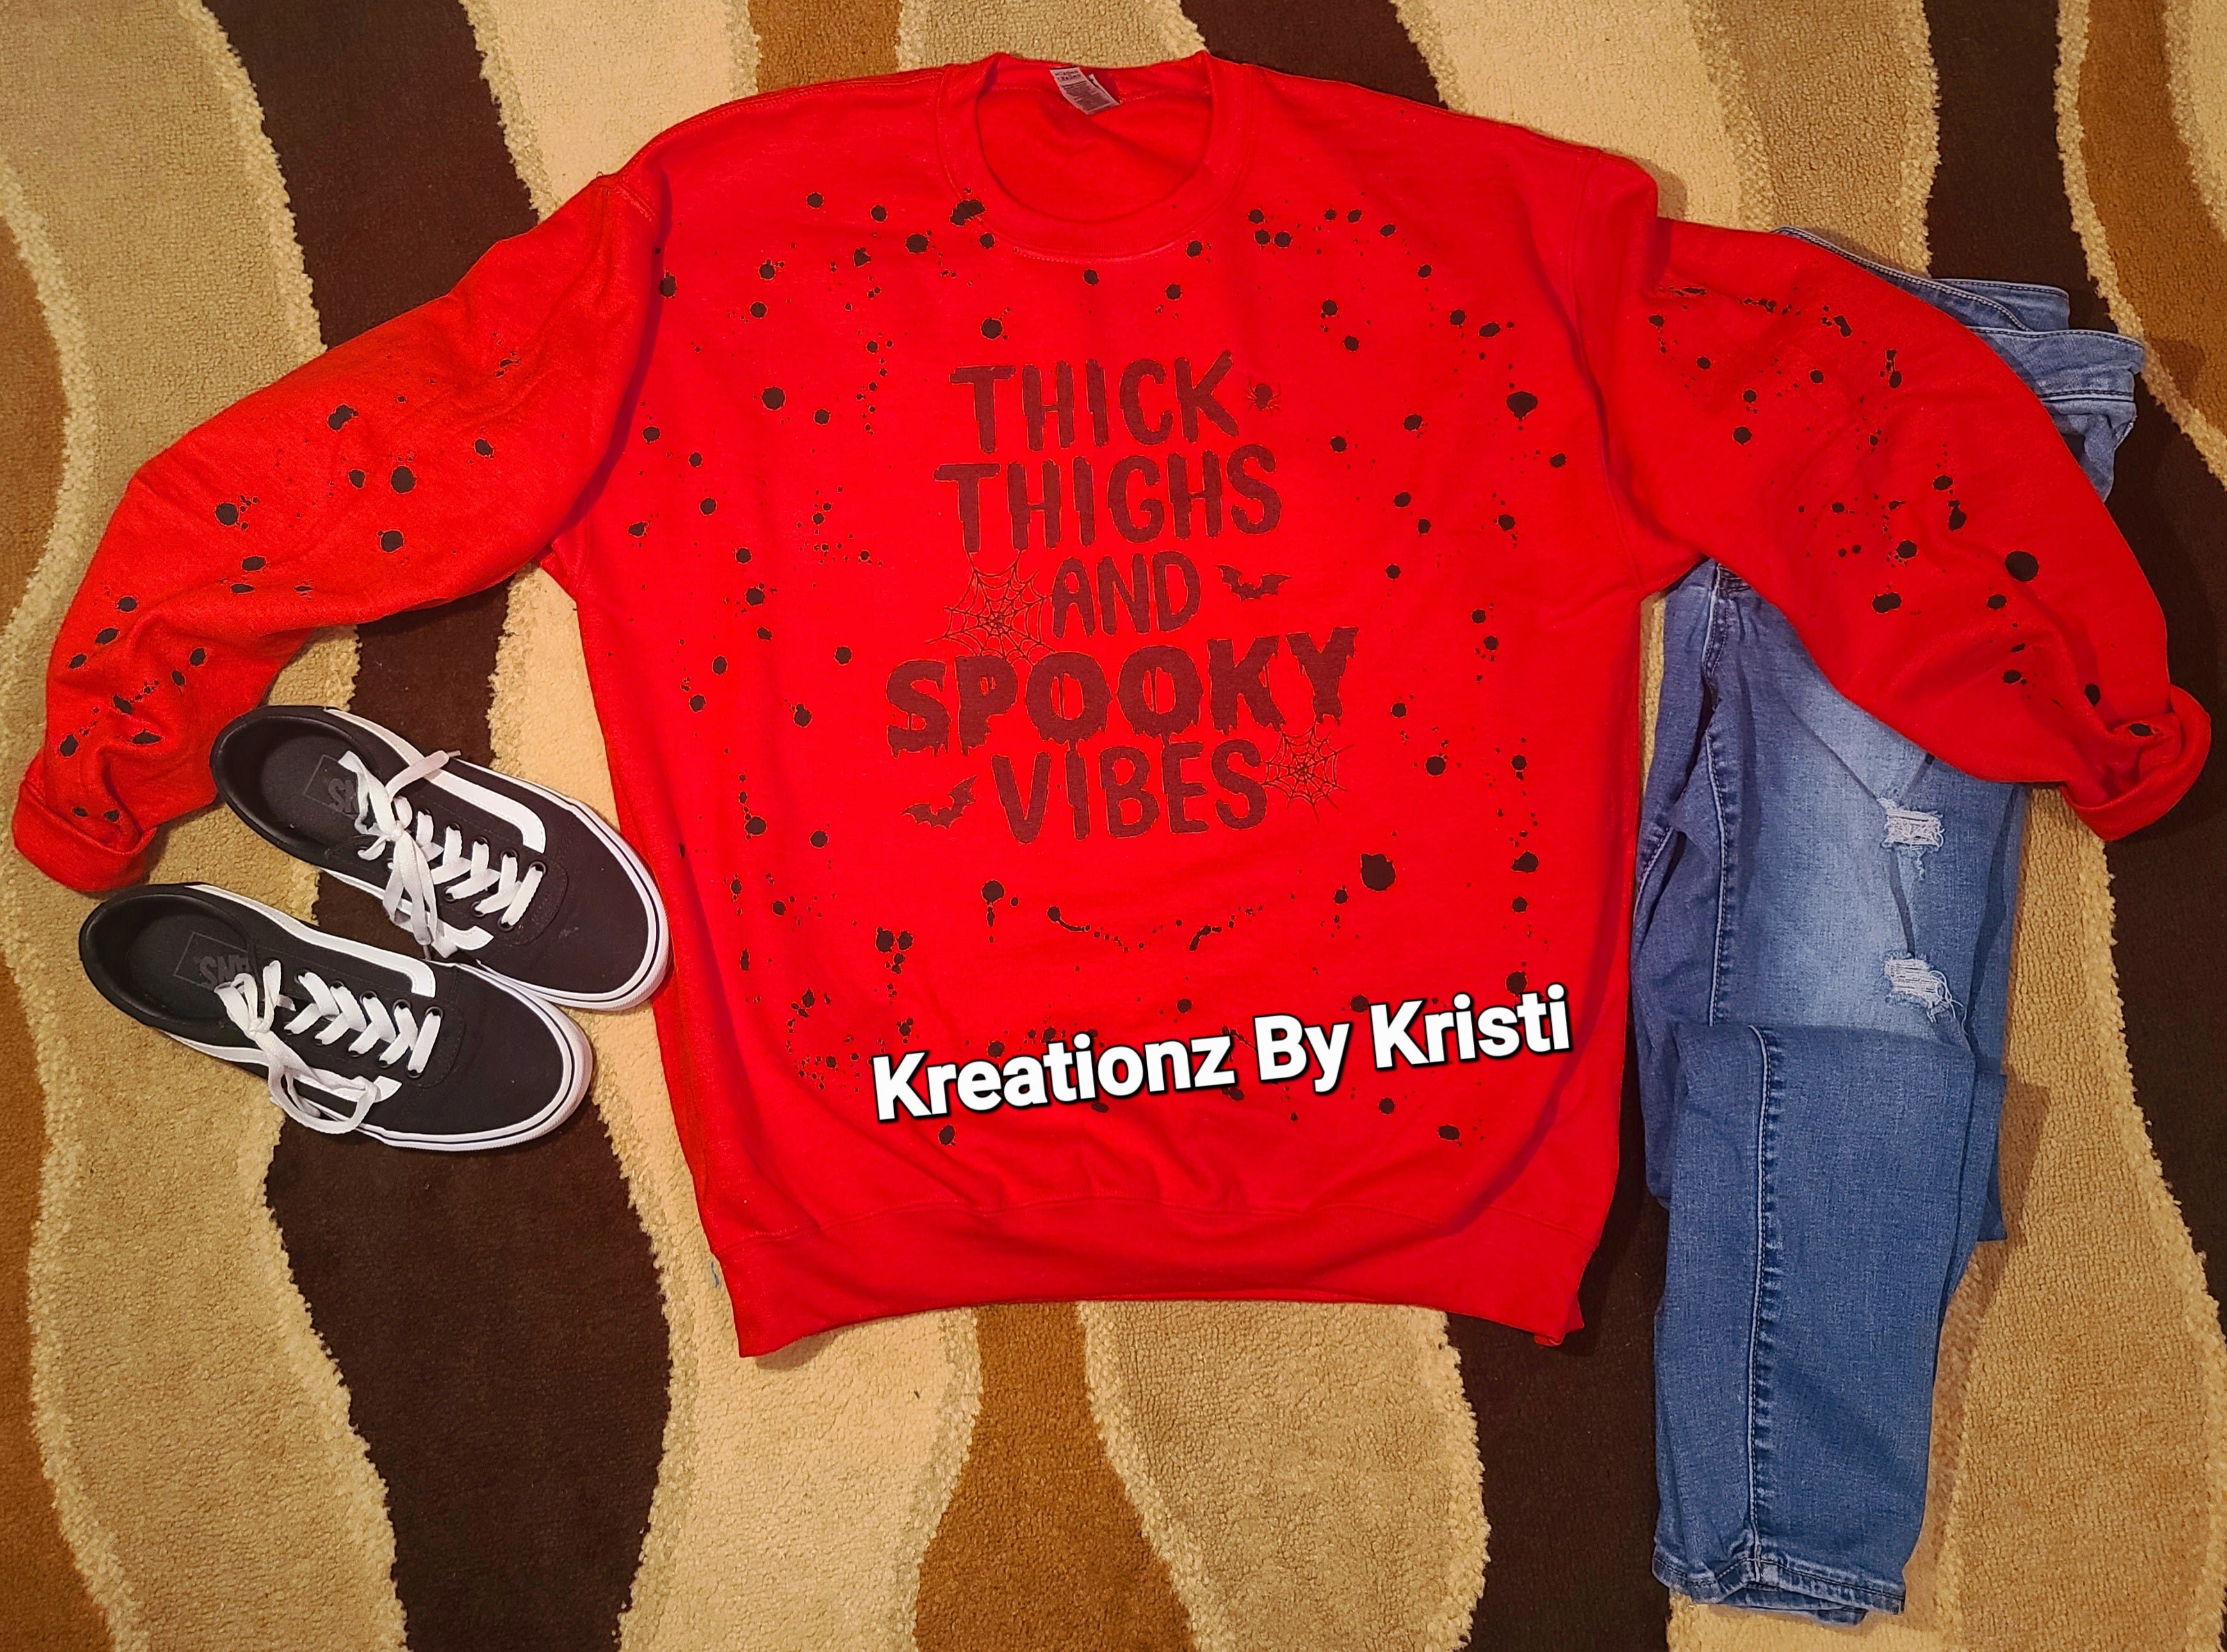 Thick thighs Halloween Sweater - Sublimination Sweater - Halloween Large